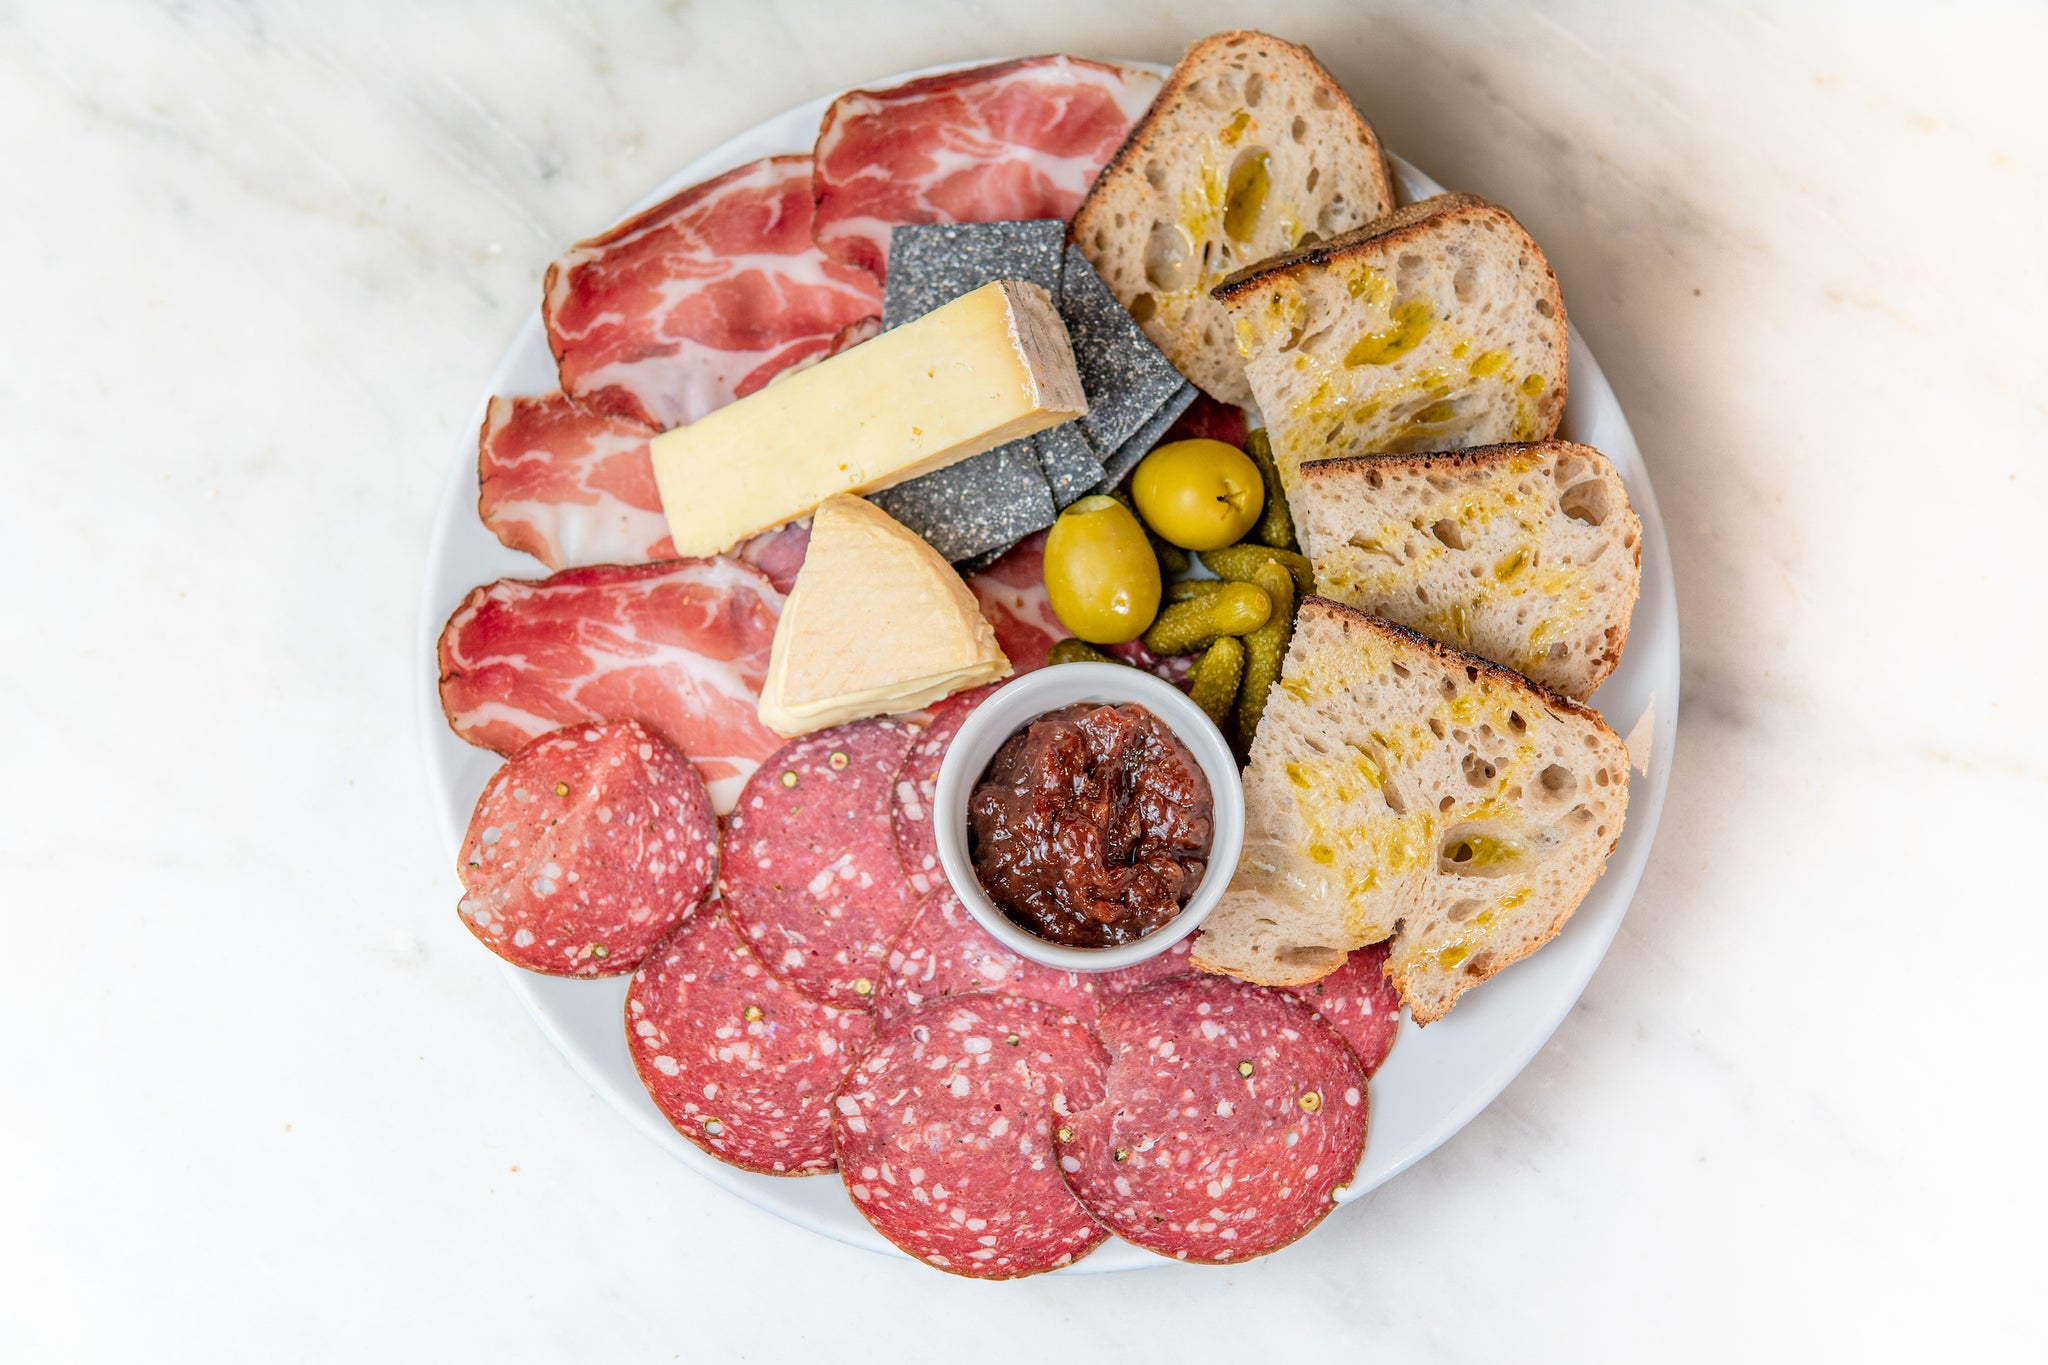 seasonal charcuterie and cheese board at friends of ham